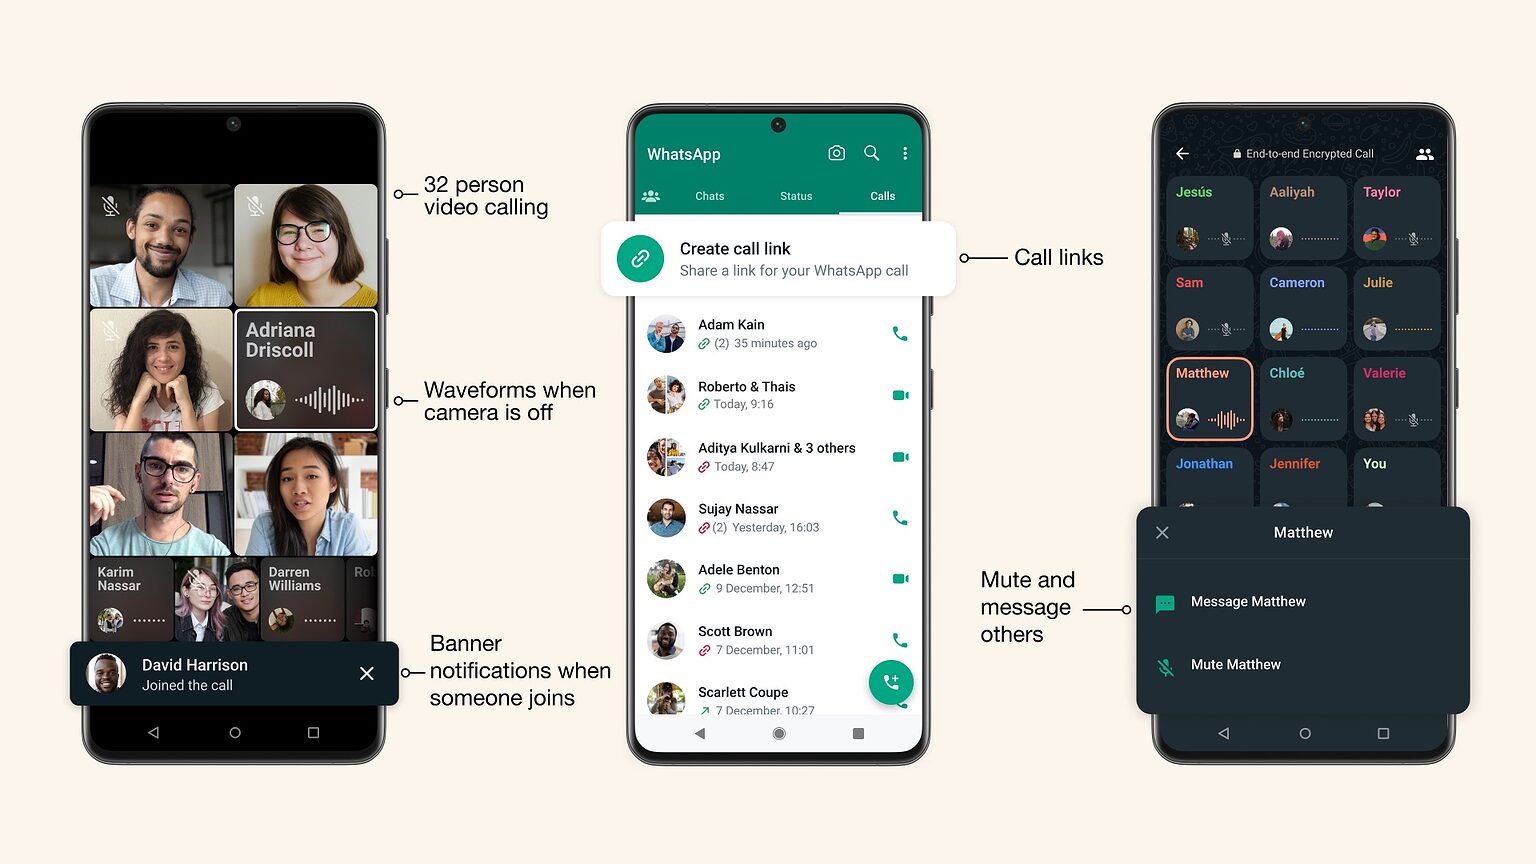 WhatsApp is getting some major call improvements, including support for up to 32 people group video calls.